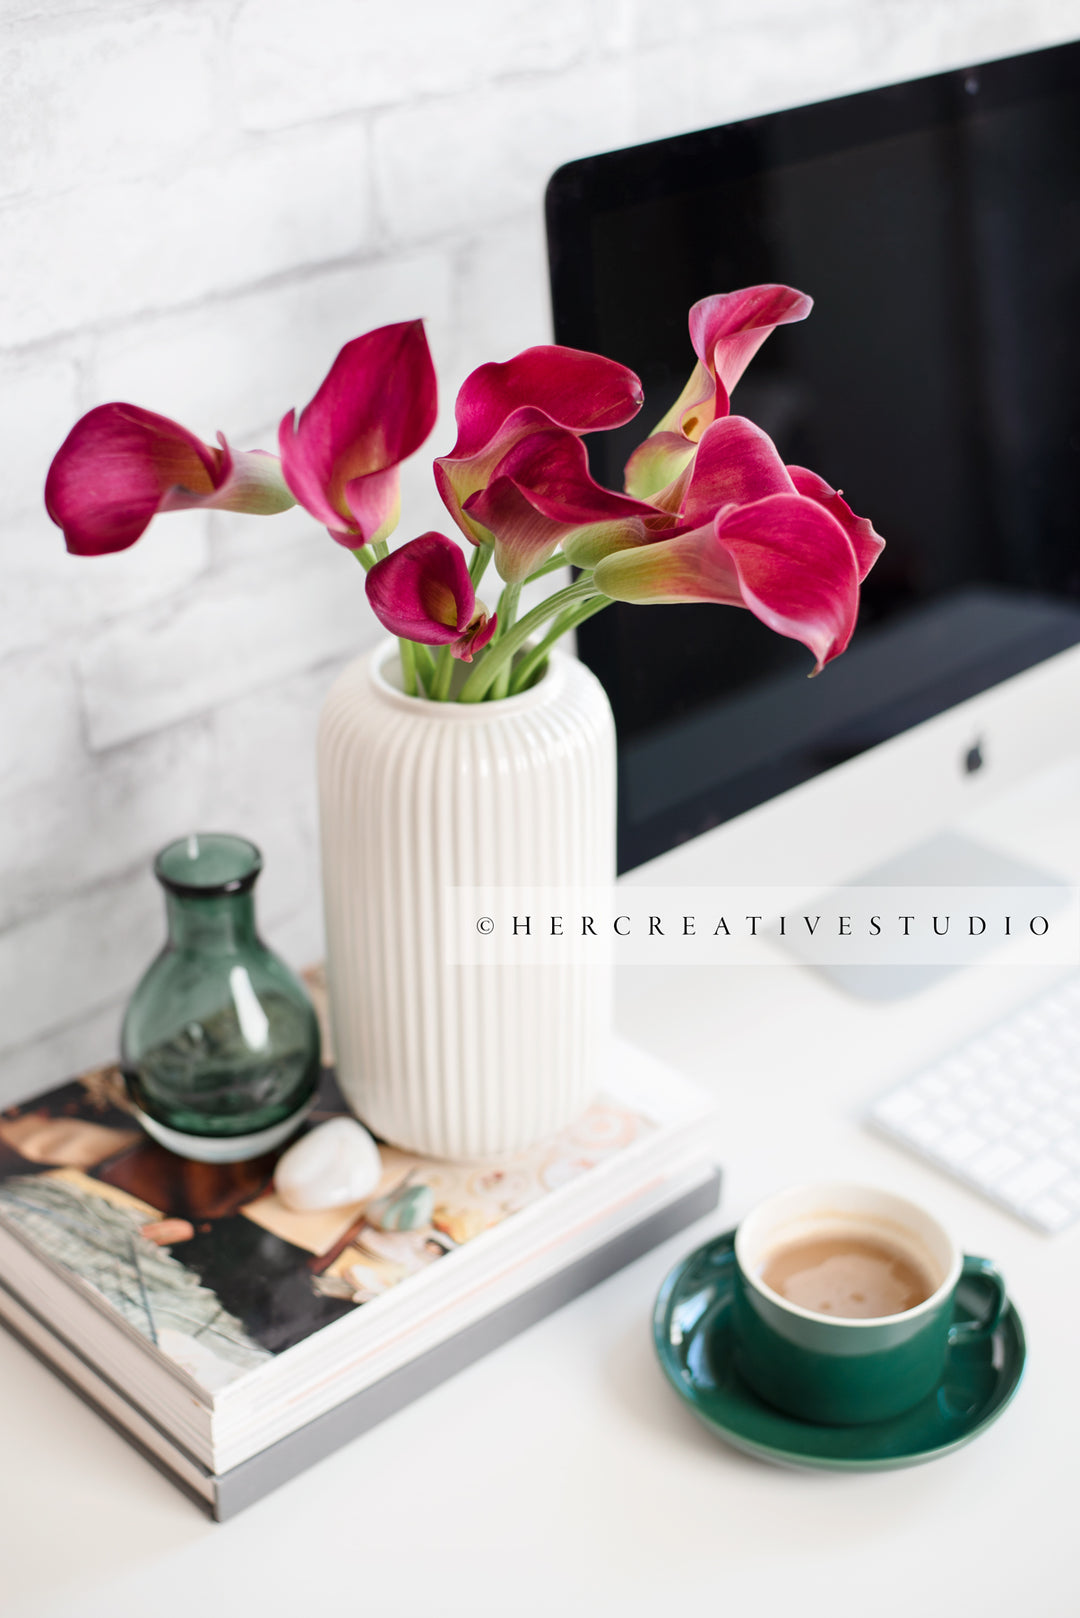 Calla Lilly & Coffee on Workspace. Stock Image.